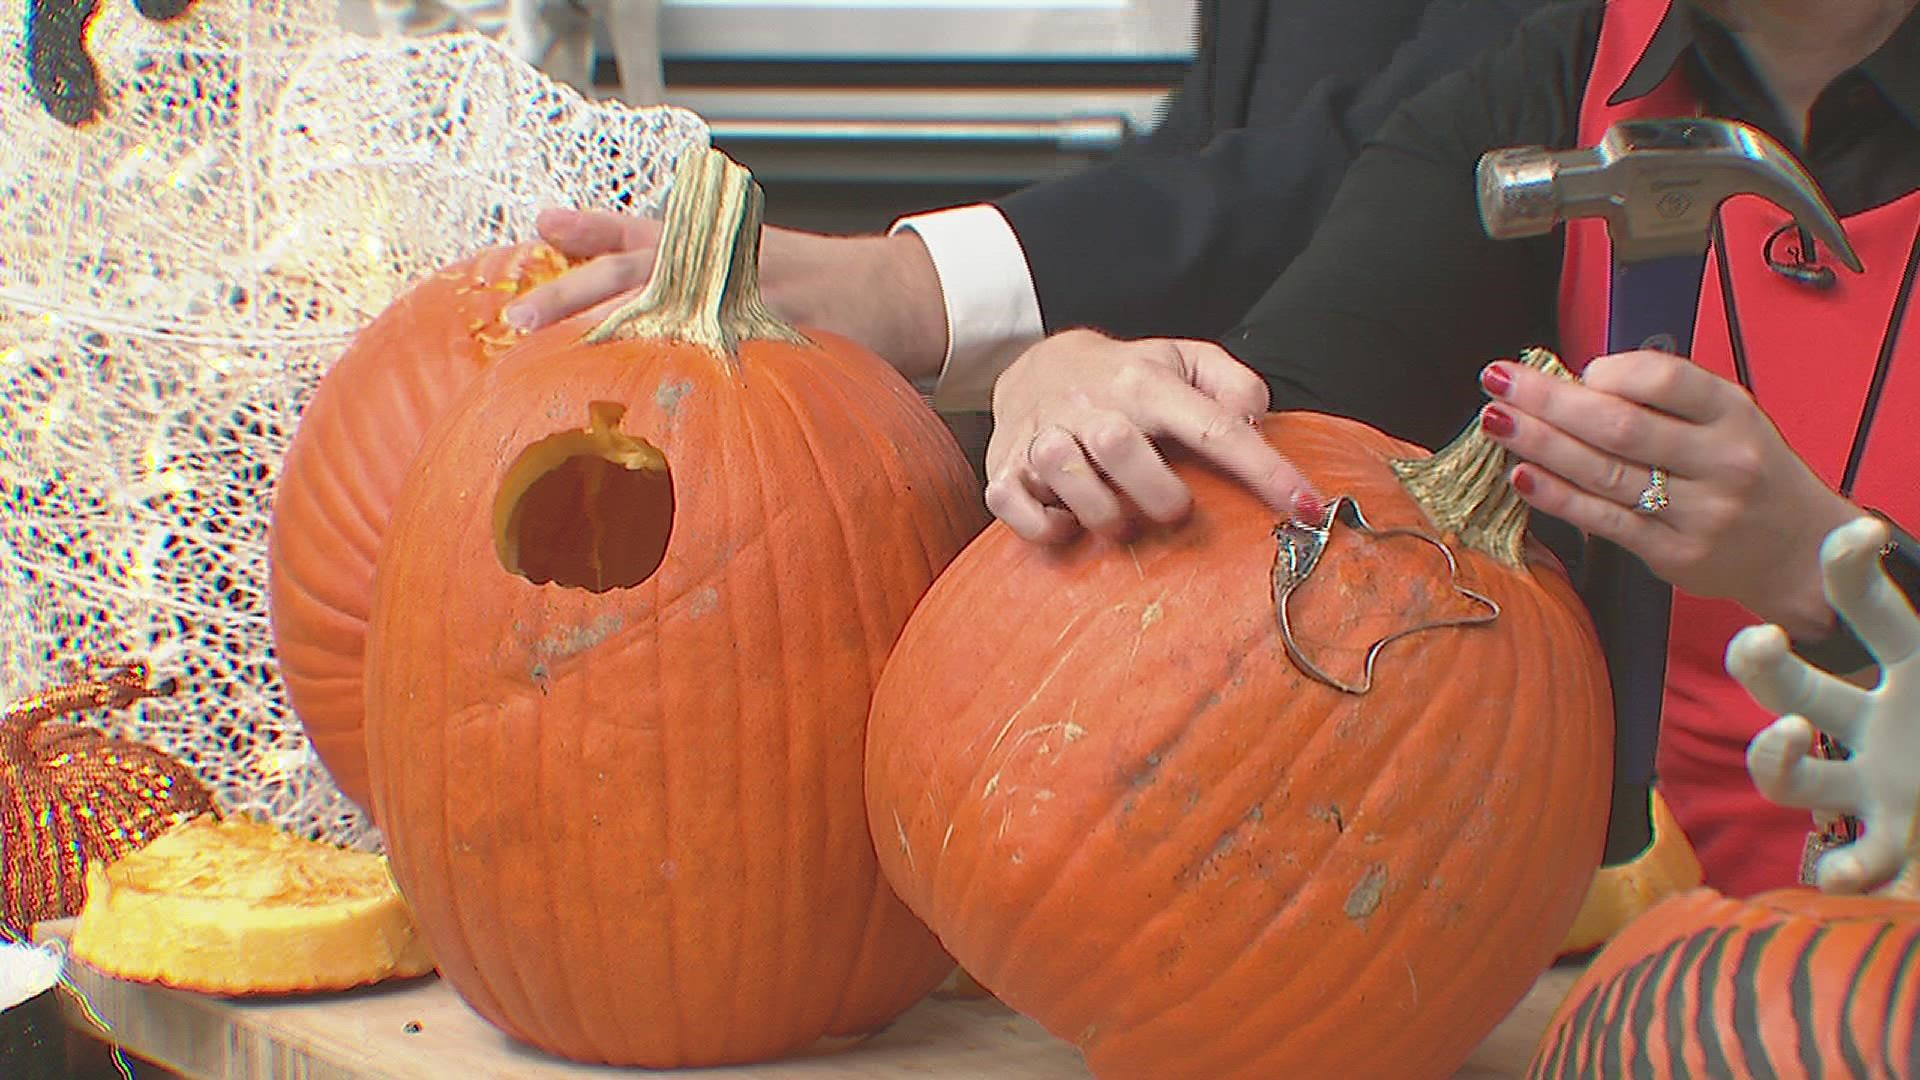 You won't need any artistic skills or scary knives to conquer this unique way to carve a pumpkin!